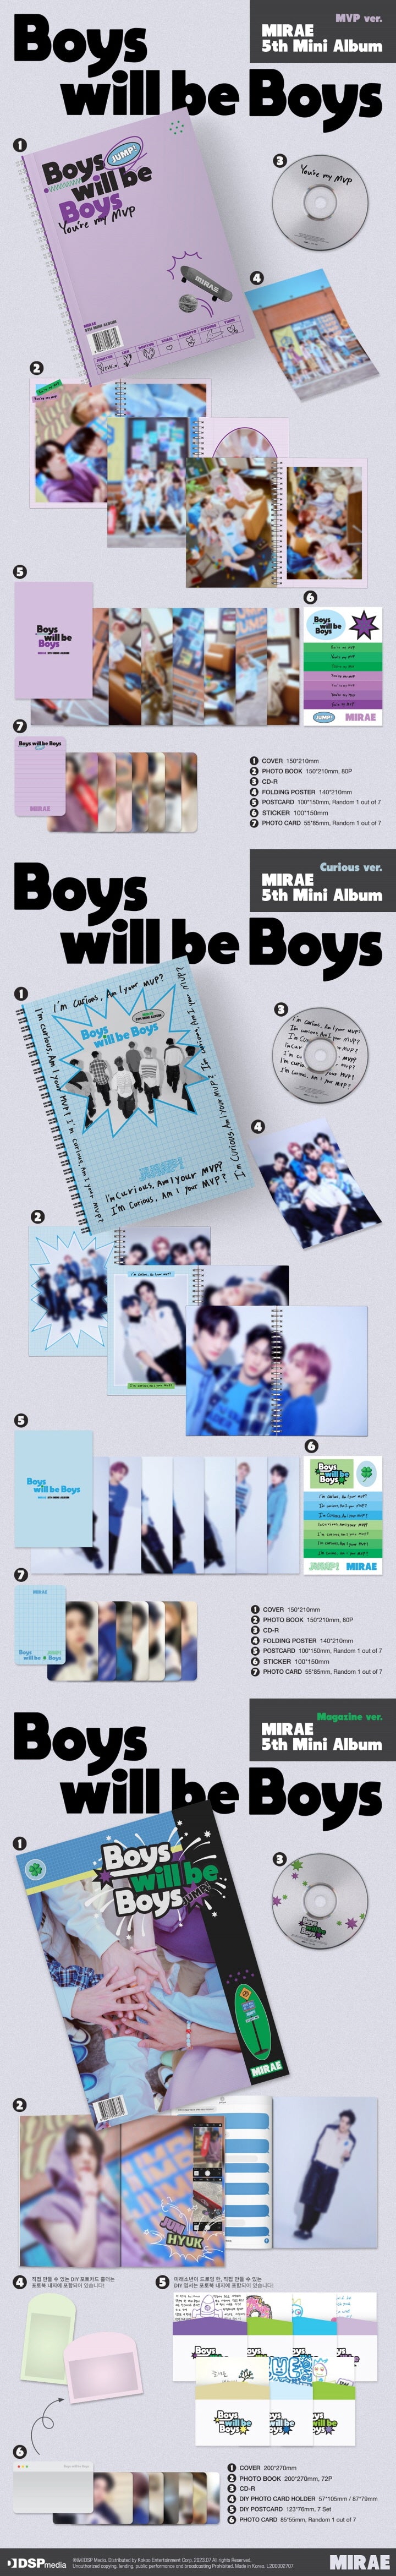 1 CD
1 Photo Book (80 pages)
1 Folding Poster
1 Postcard (random out of 7 types)
1 Sticker
1 Photo Card (random out of 7 t...